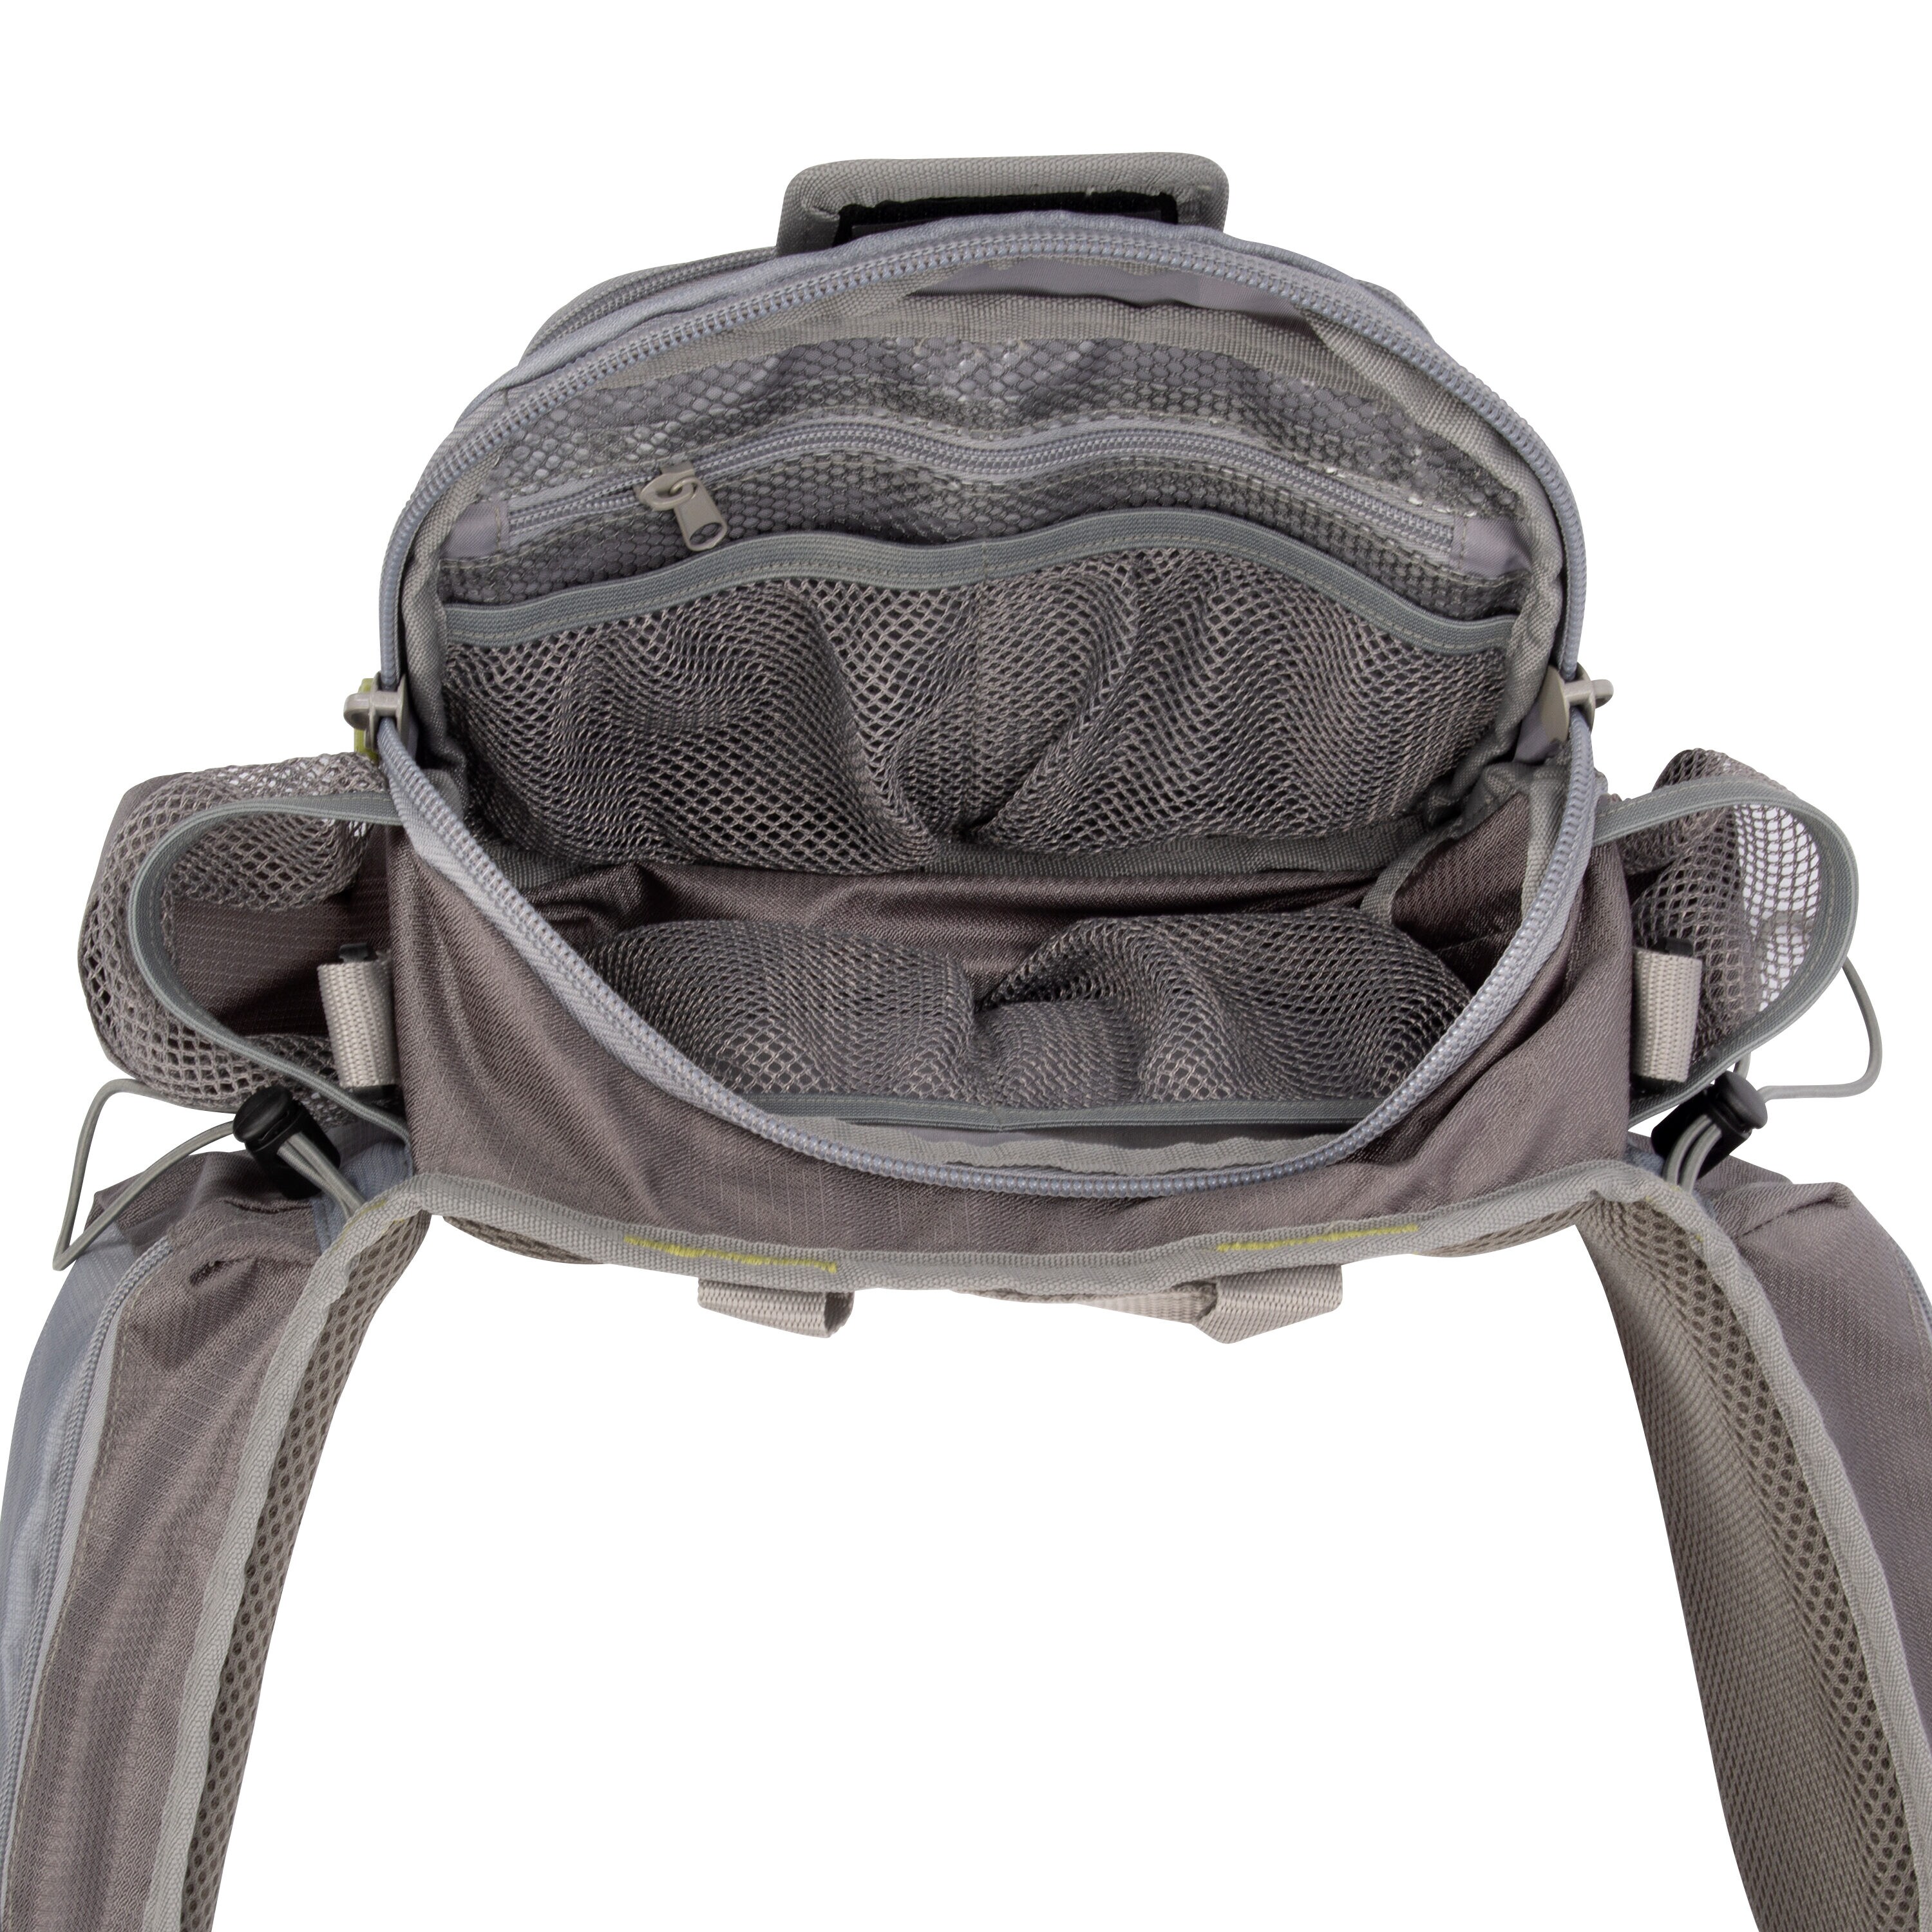 Allen Company Bear Creek Micro Fly Fishing Chest Pack, Fits up to 4 Tackle/ Fly Boxes